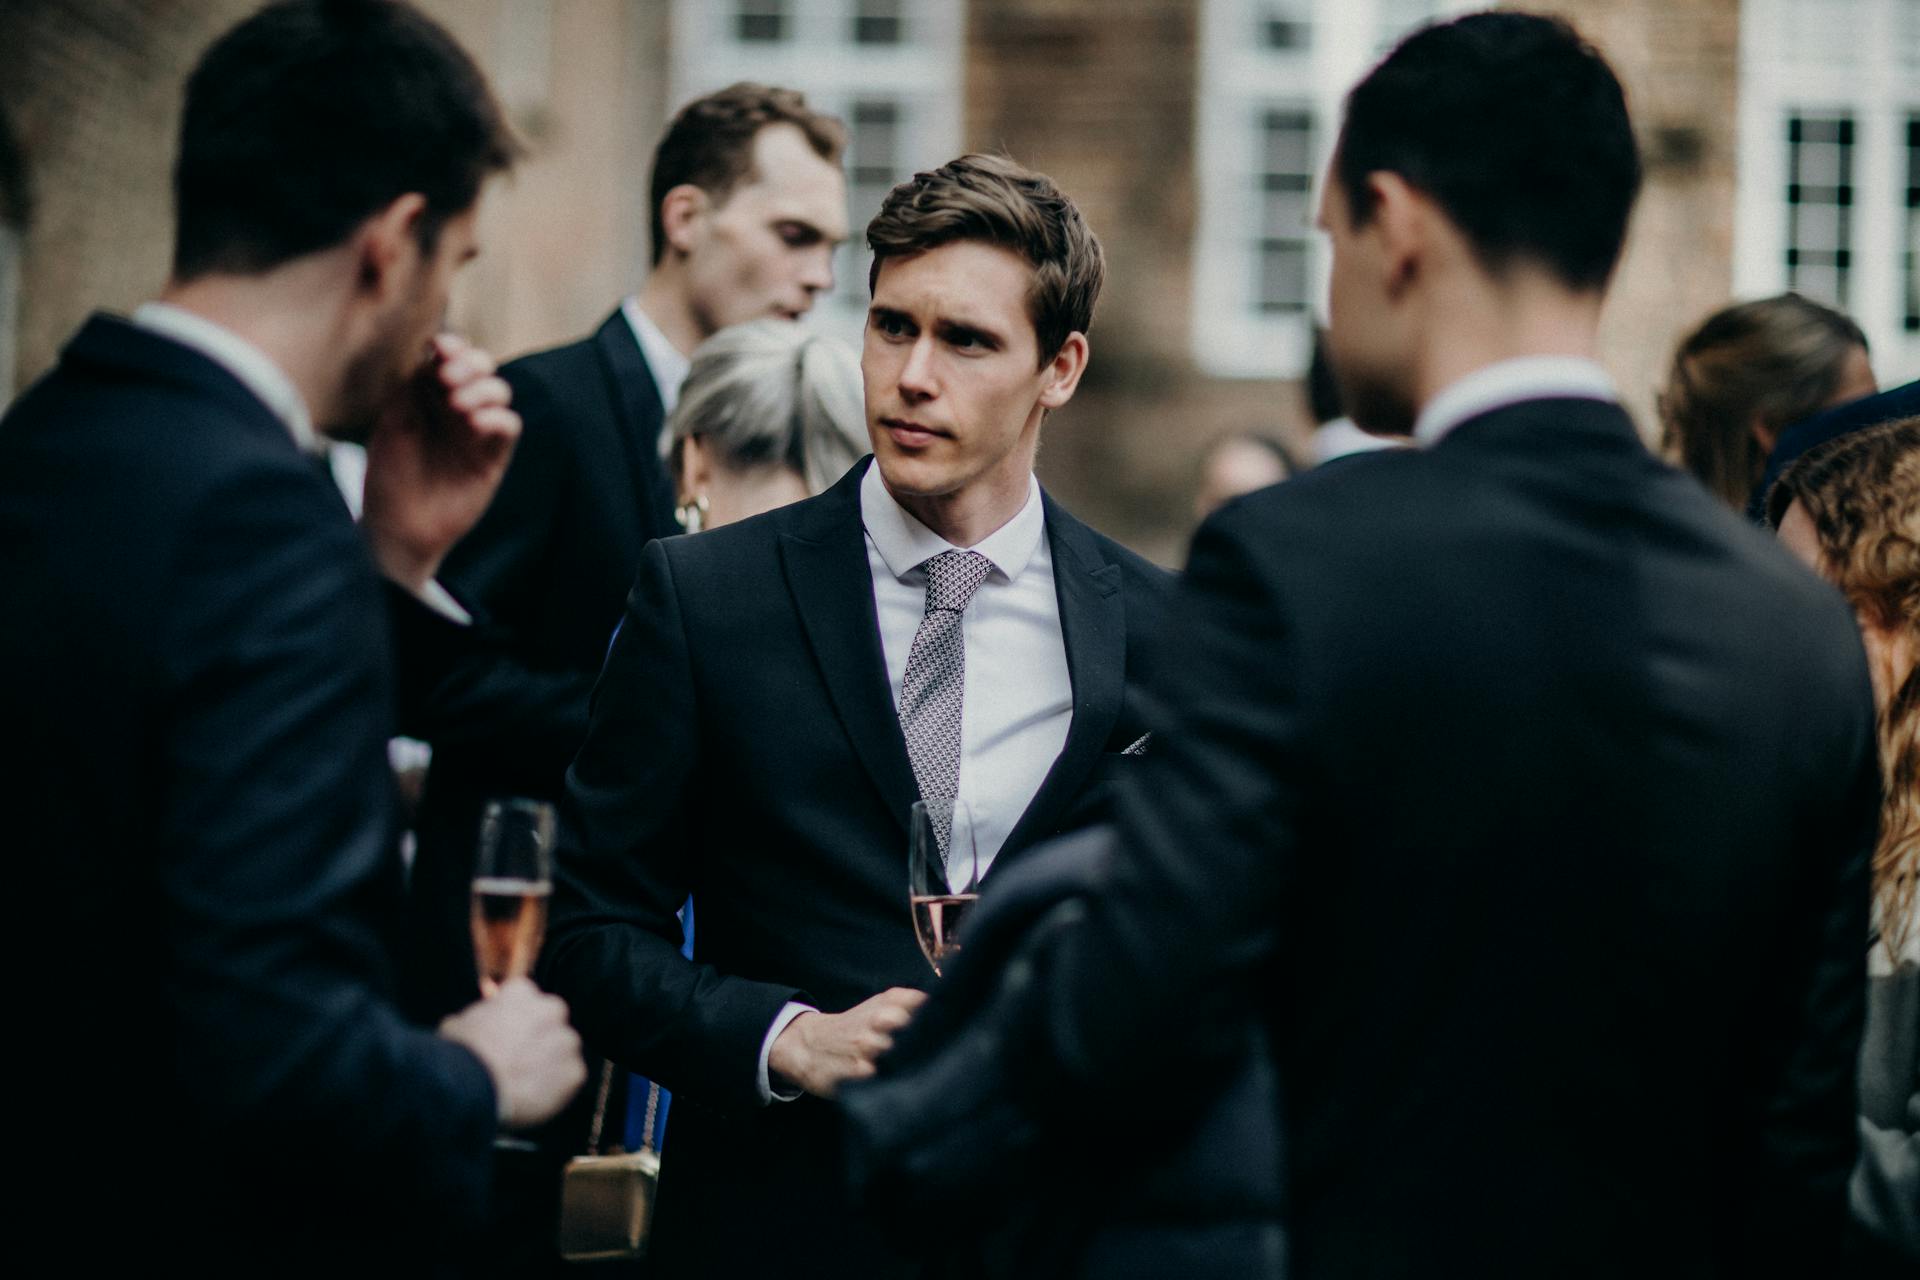 Men in suits talking at a party | Source: Pexels